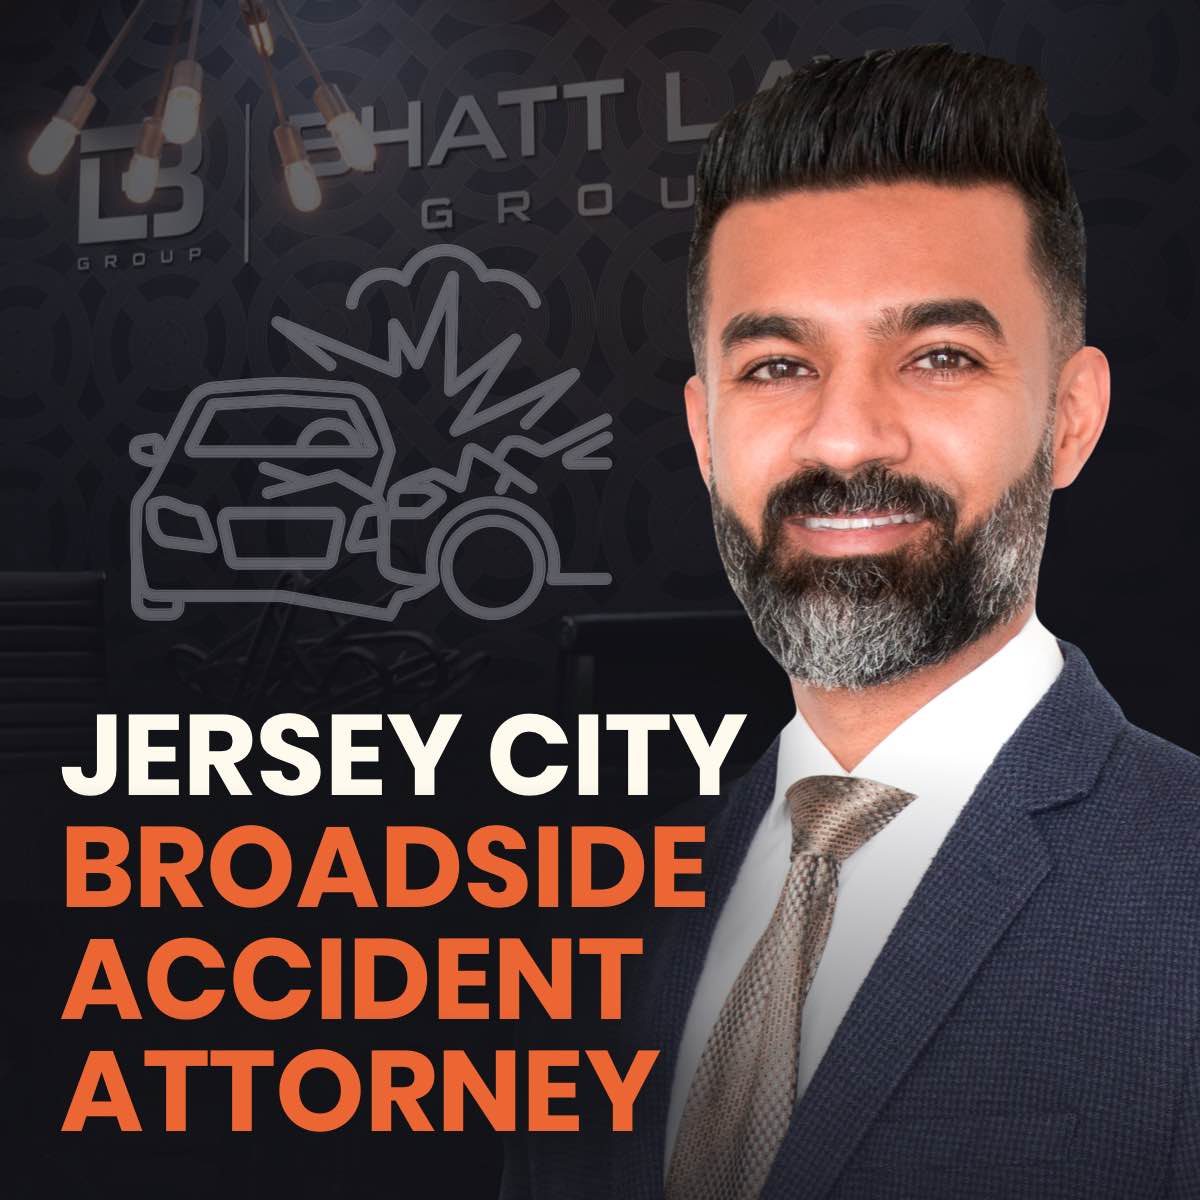 Jersey City Broadside Accident Attorney